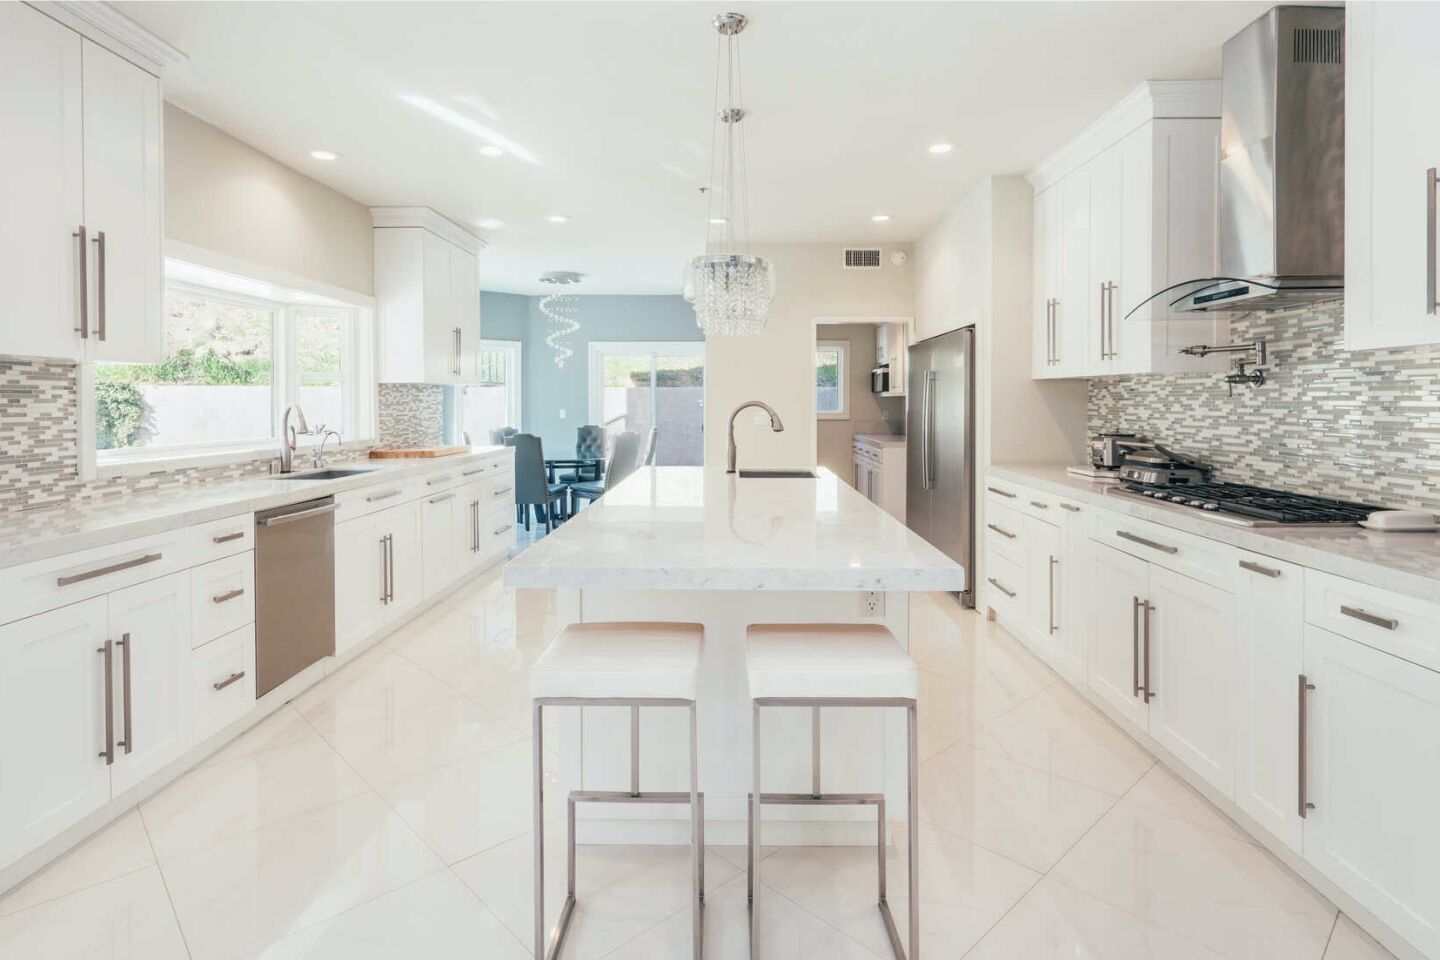 A long kitchen with long, marble-topped center island, white cabinets and tile backsplashes.